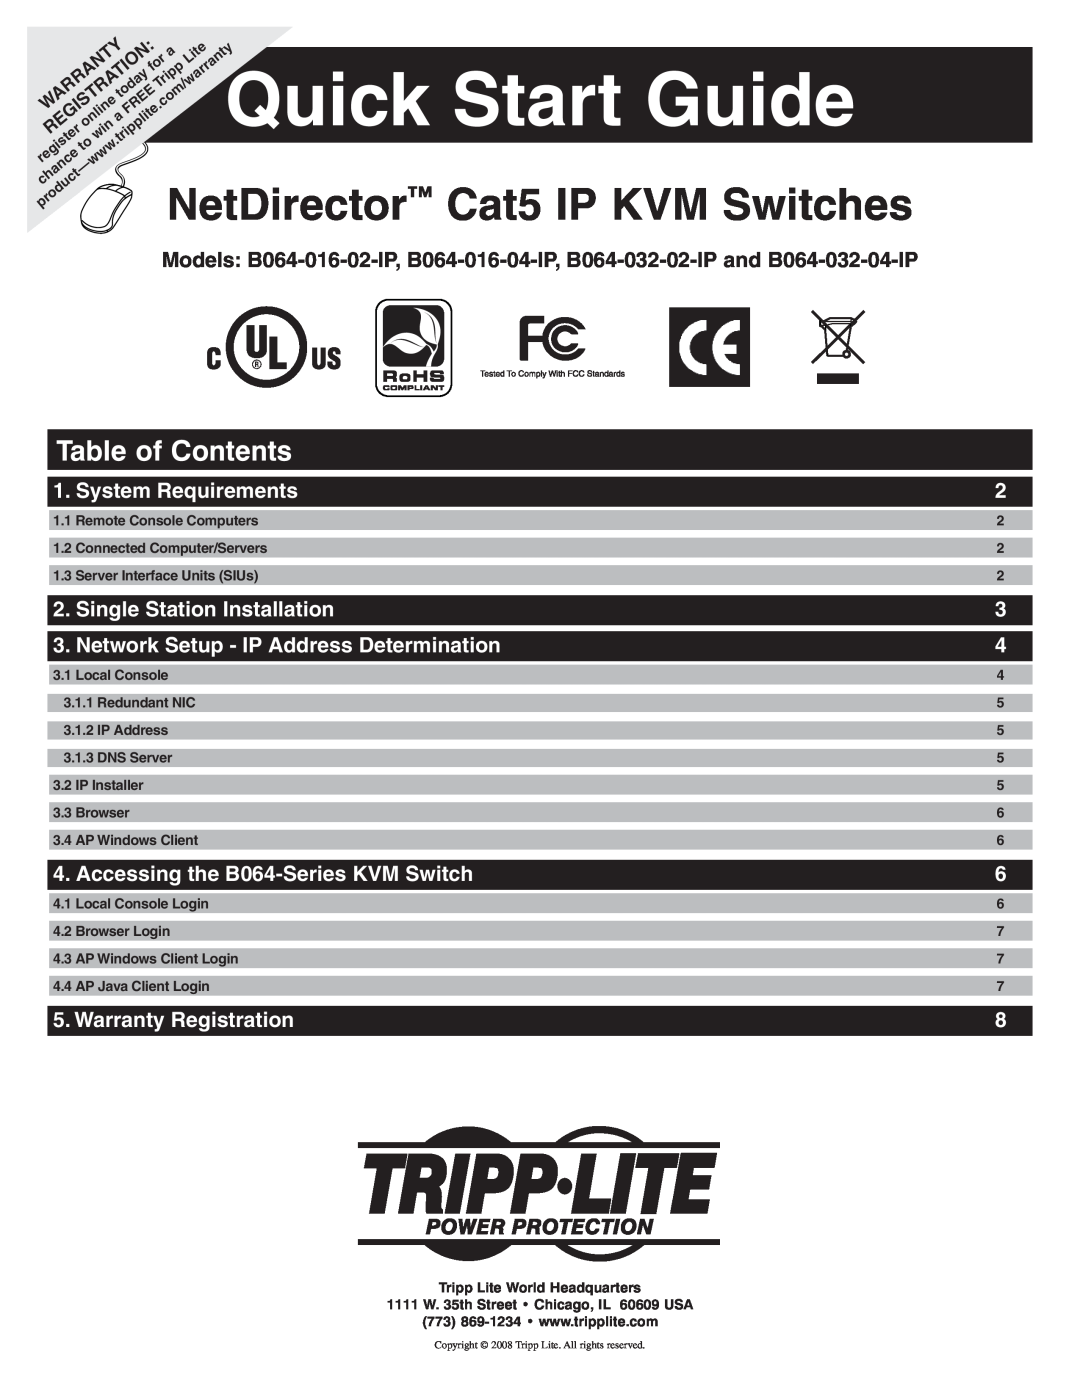 Tripp Lite B064-016-04-IP quick start Table of Contents, Quick, Start Guide, NetDirector, Cat5 IP KVM Switches 